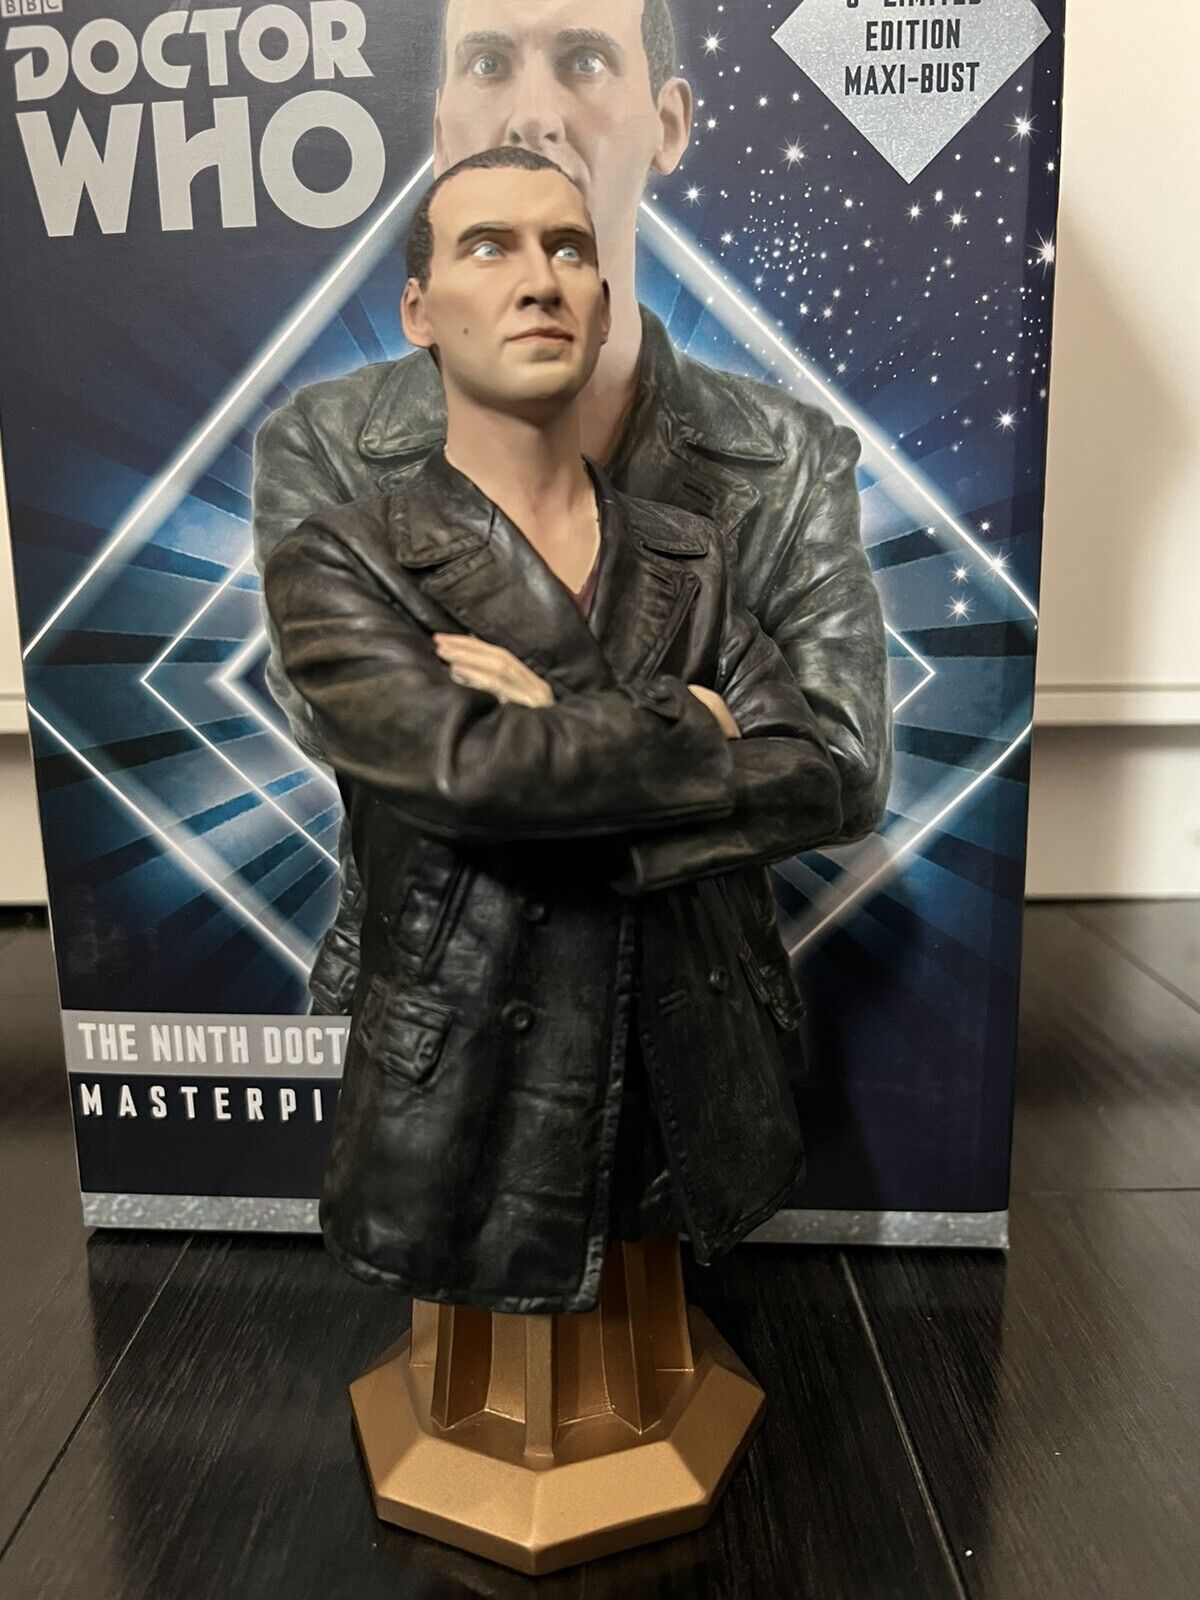 Titan Doctor Who 9th Doctor Maxi Bust Bust Is Mint.  Christopher Eccleston